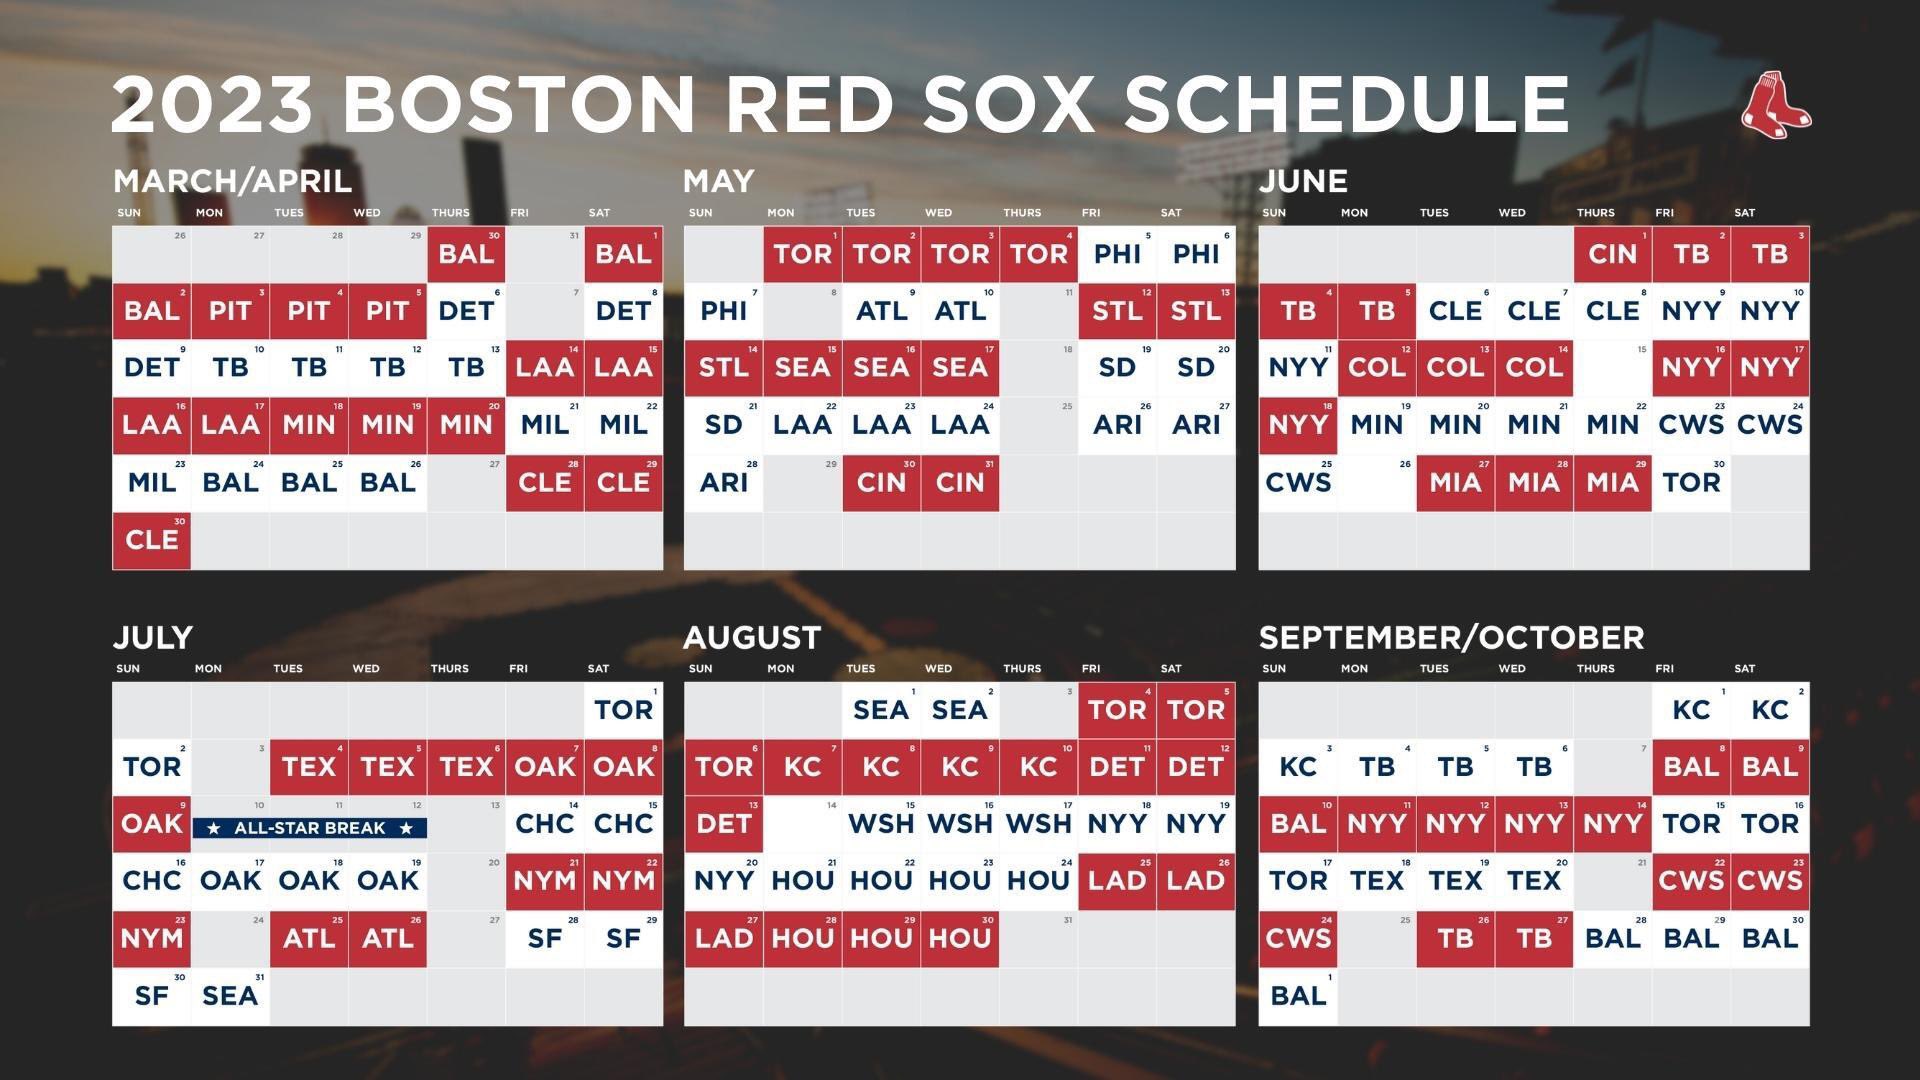 Red Sox on Twitter "The 2023 schedule has arrived! 🗓 https//t.co